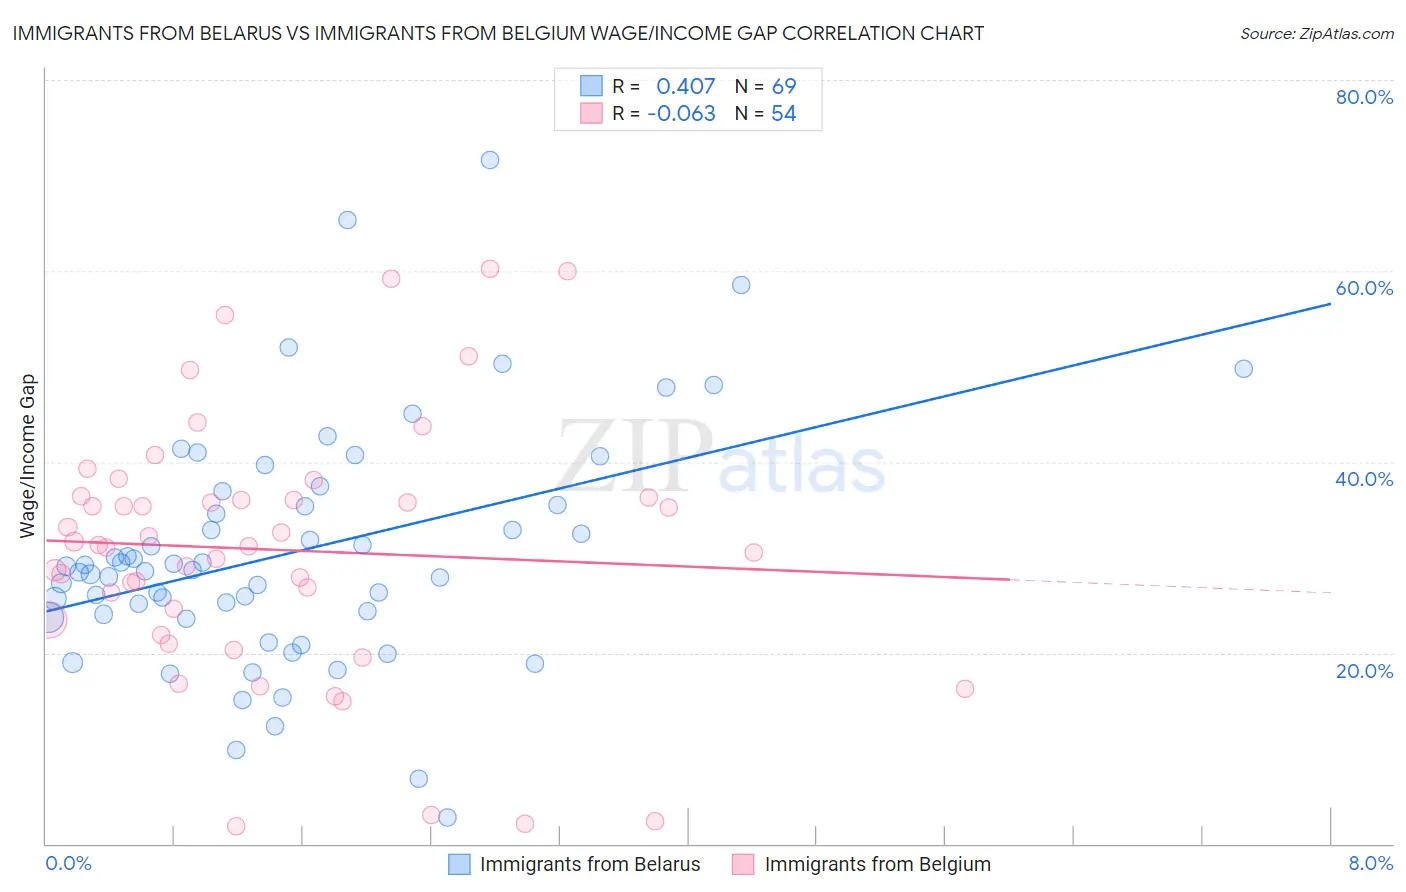 Immigrants from Belarus vs Immigrants from Belgium Wage/Income Gap